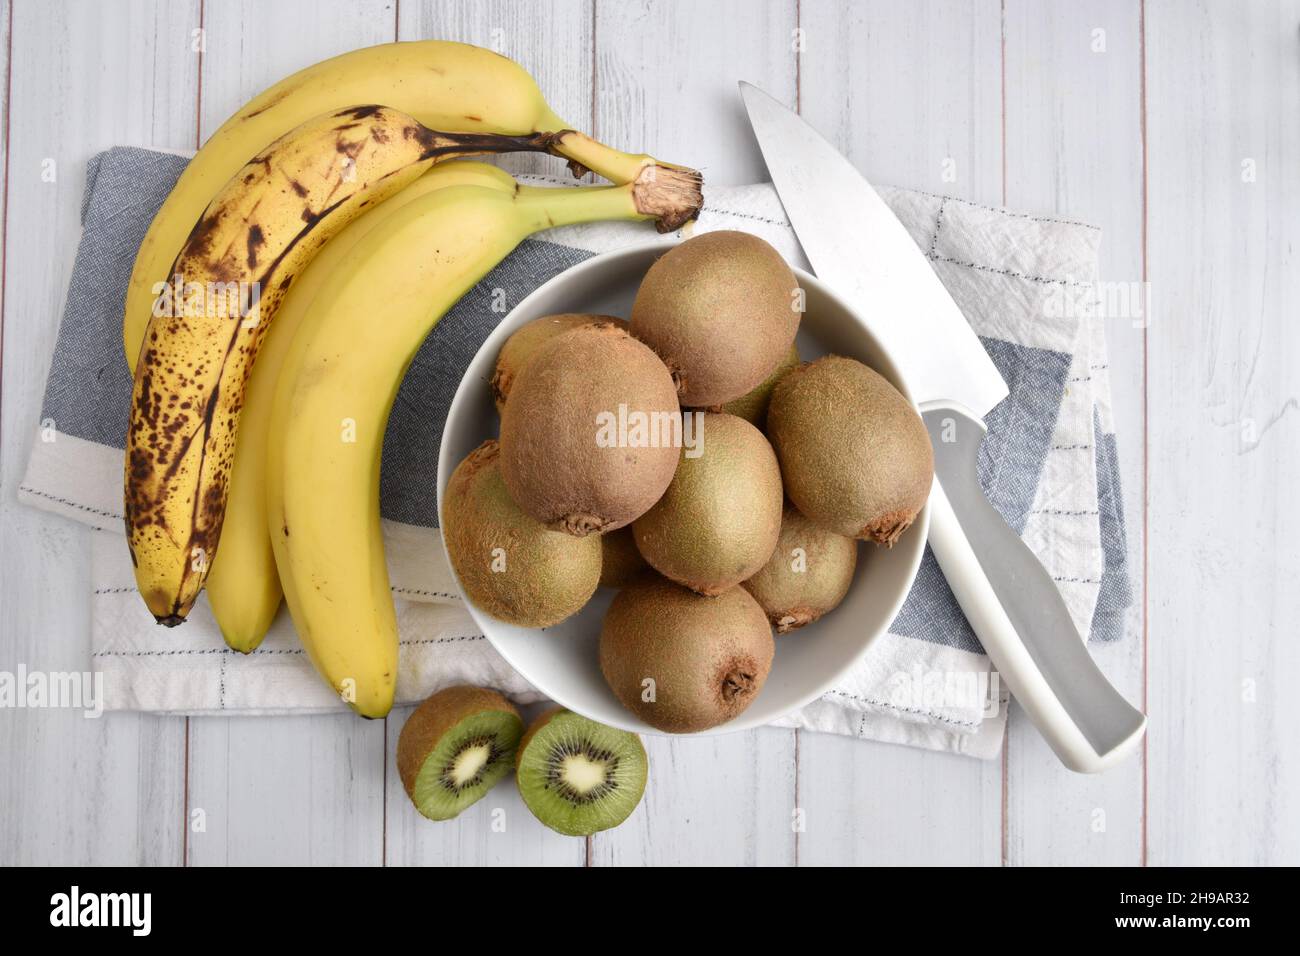 Overhead view of a bowl of kiwi fruit with bananas and apples on wooden table Stock Photo